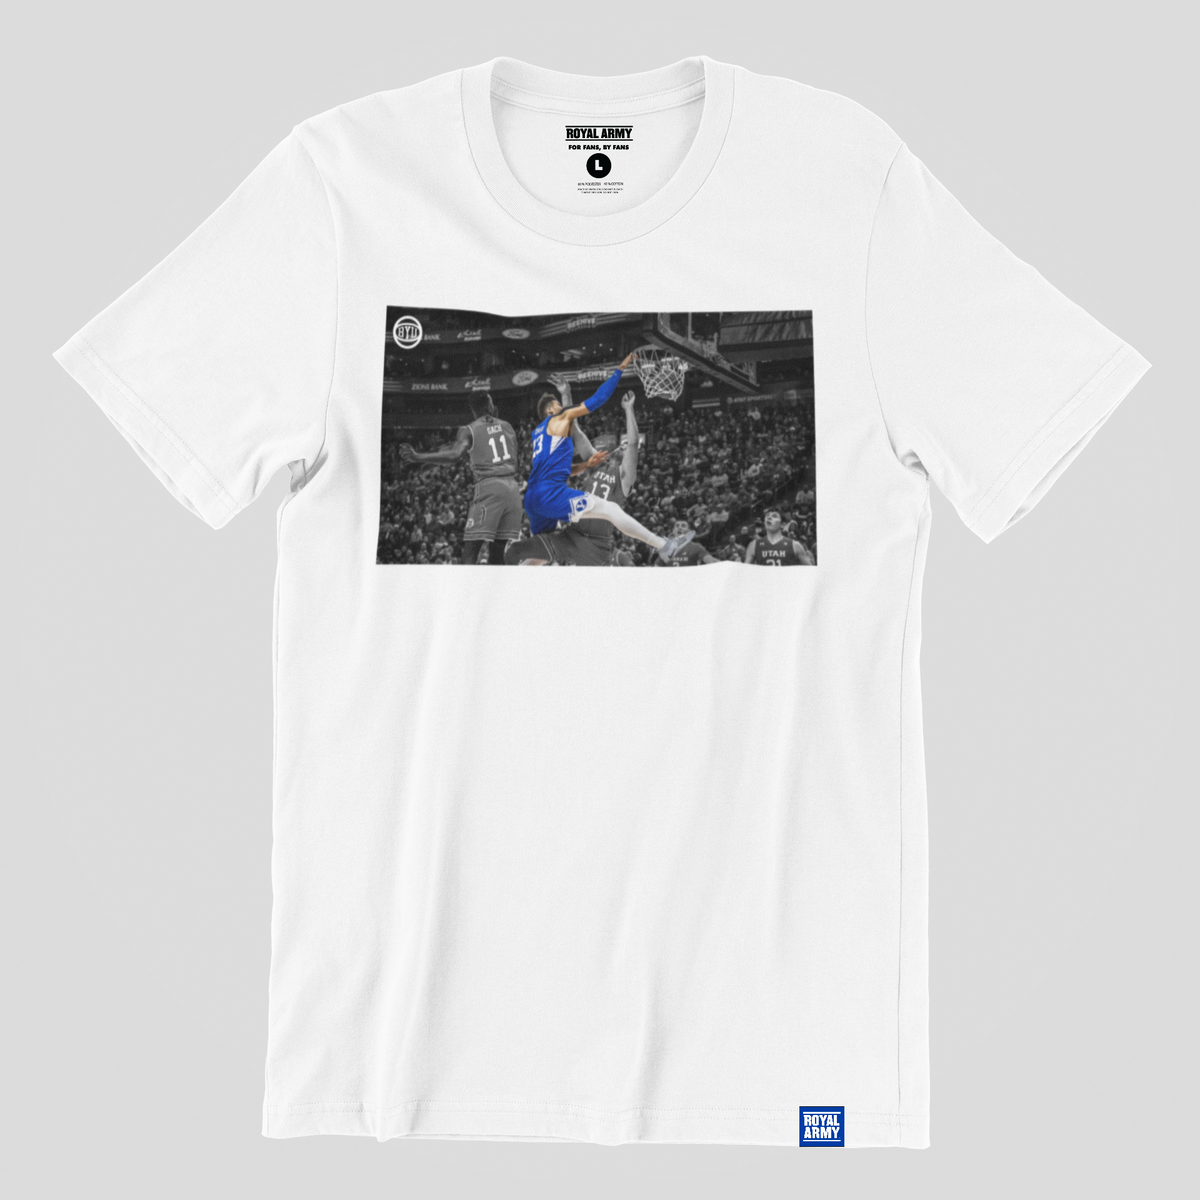 The Dunk Colorpop BYU T-shirt